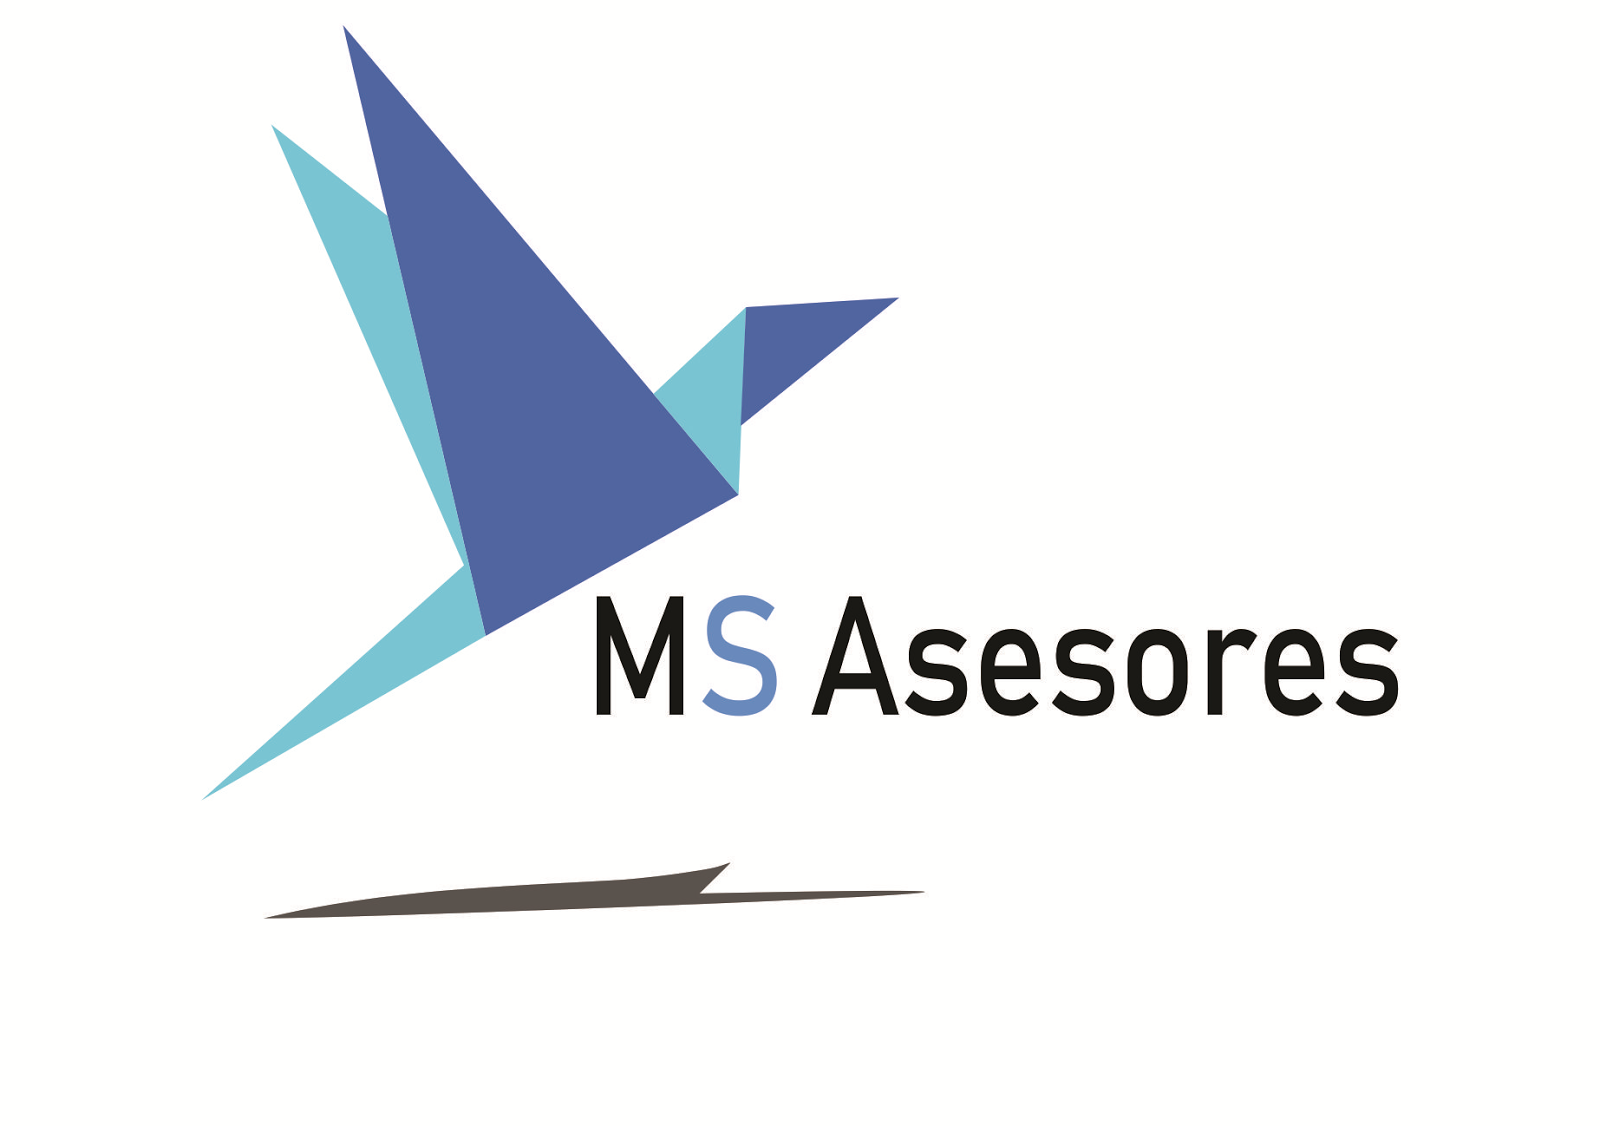 MS Asesores